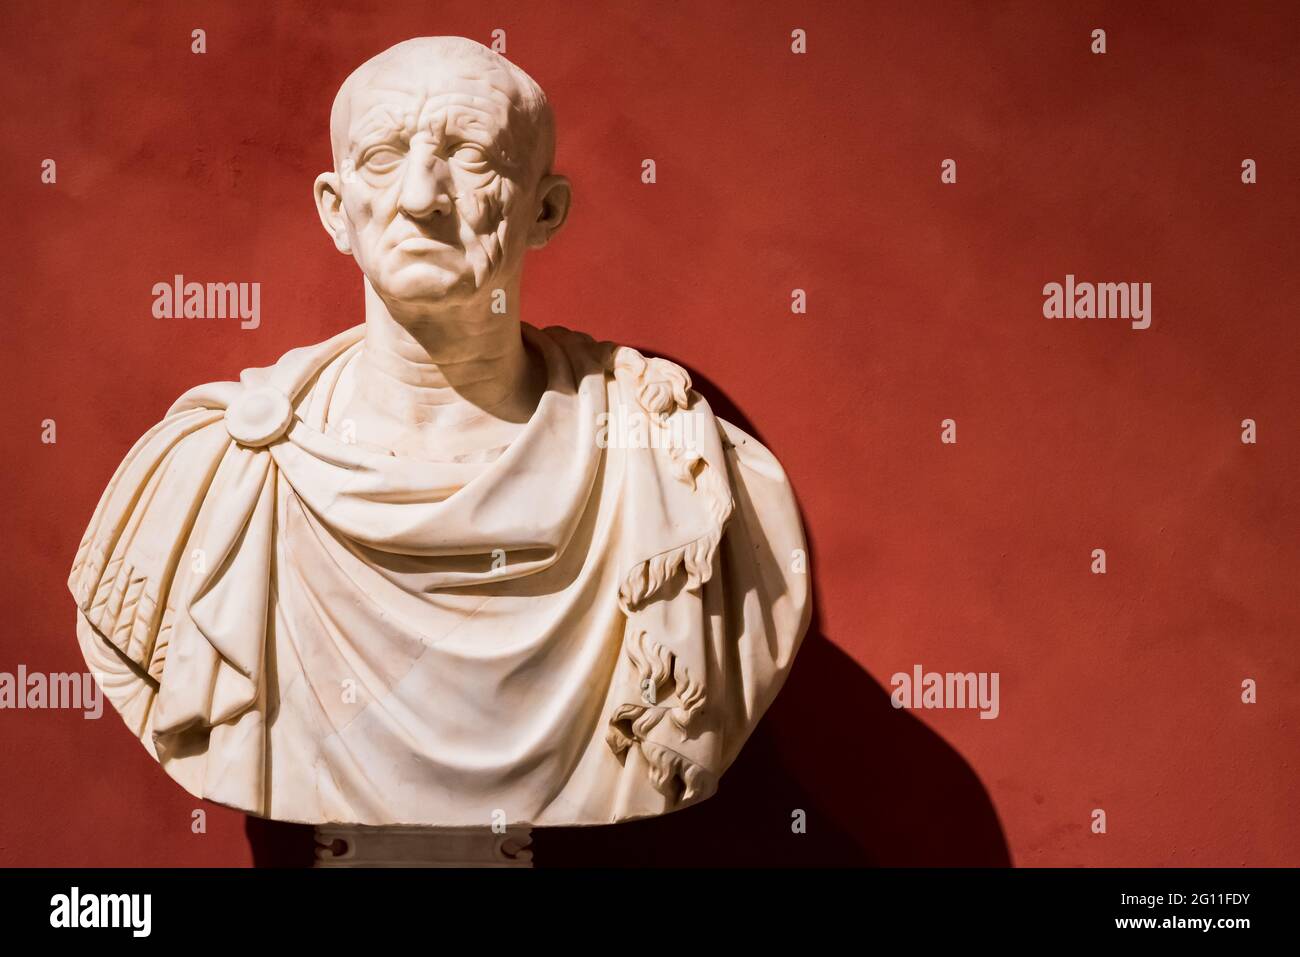 Close-up on ancient bust of senior man Stock Photo